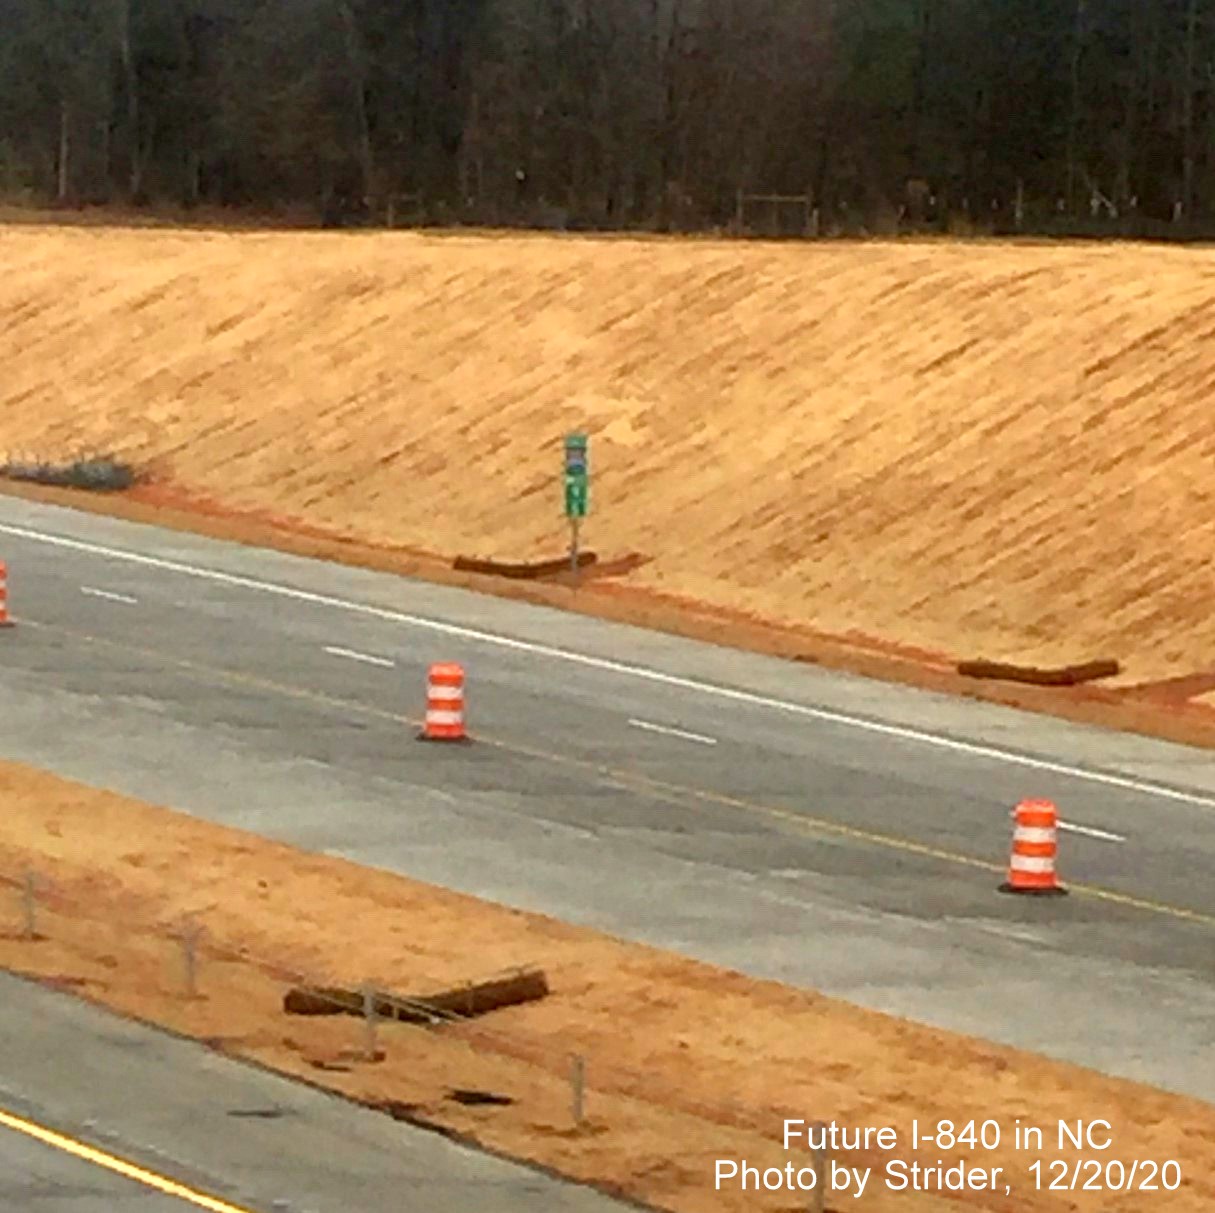 Image of new lane markings being placed along soon to be opened section of I-840 Greensboro Urban Loop between Lawndale Drive and North Elm Street, photo by Strider, December 2020